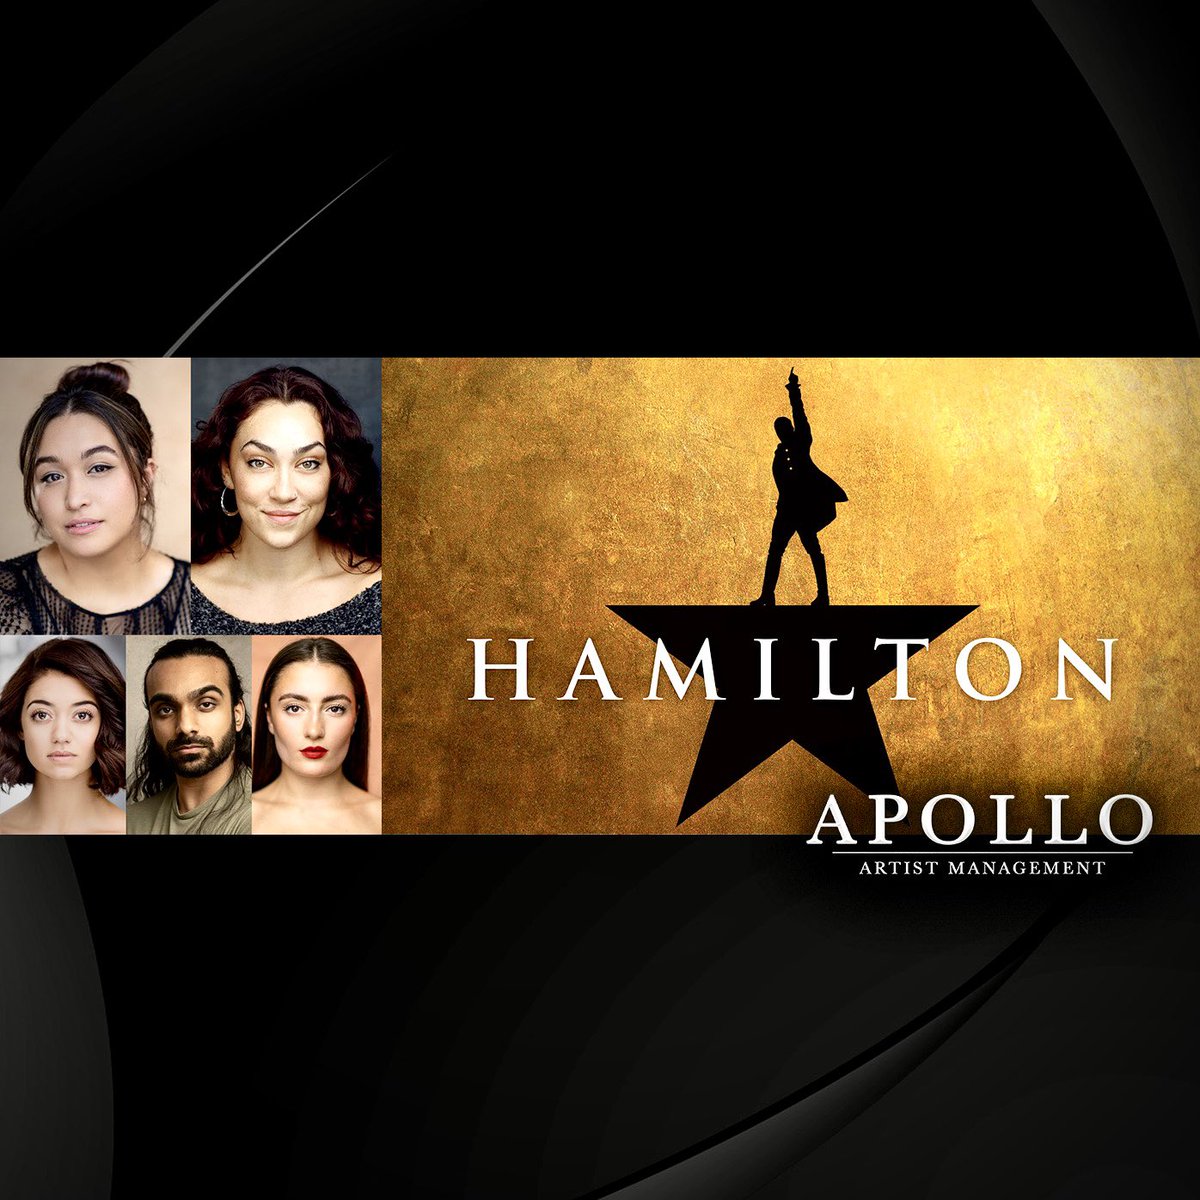 Delighted to announce that our incredible Nicola Espallardo & Roxanne Couch will be joining ‘Hamilton: The Musical’ in the West End alongside our fabulous trio of Ella Kora, Hassun Sharif & Gabriela Acosta! #TeamApollo #ProudAgents #TheRoomWhereItHappens